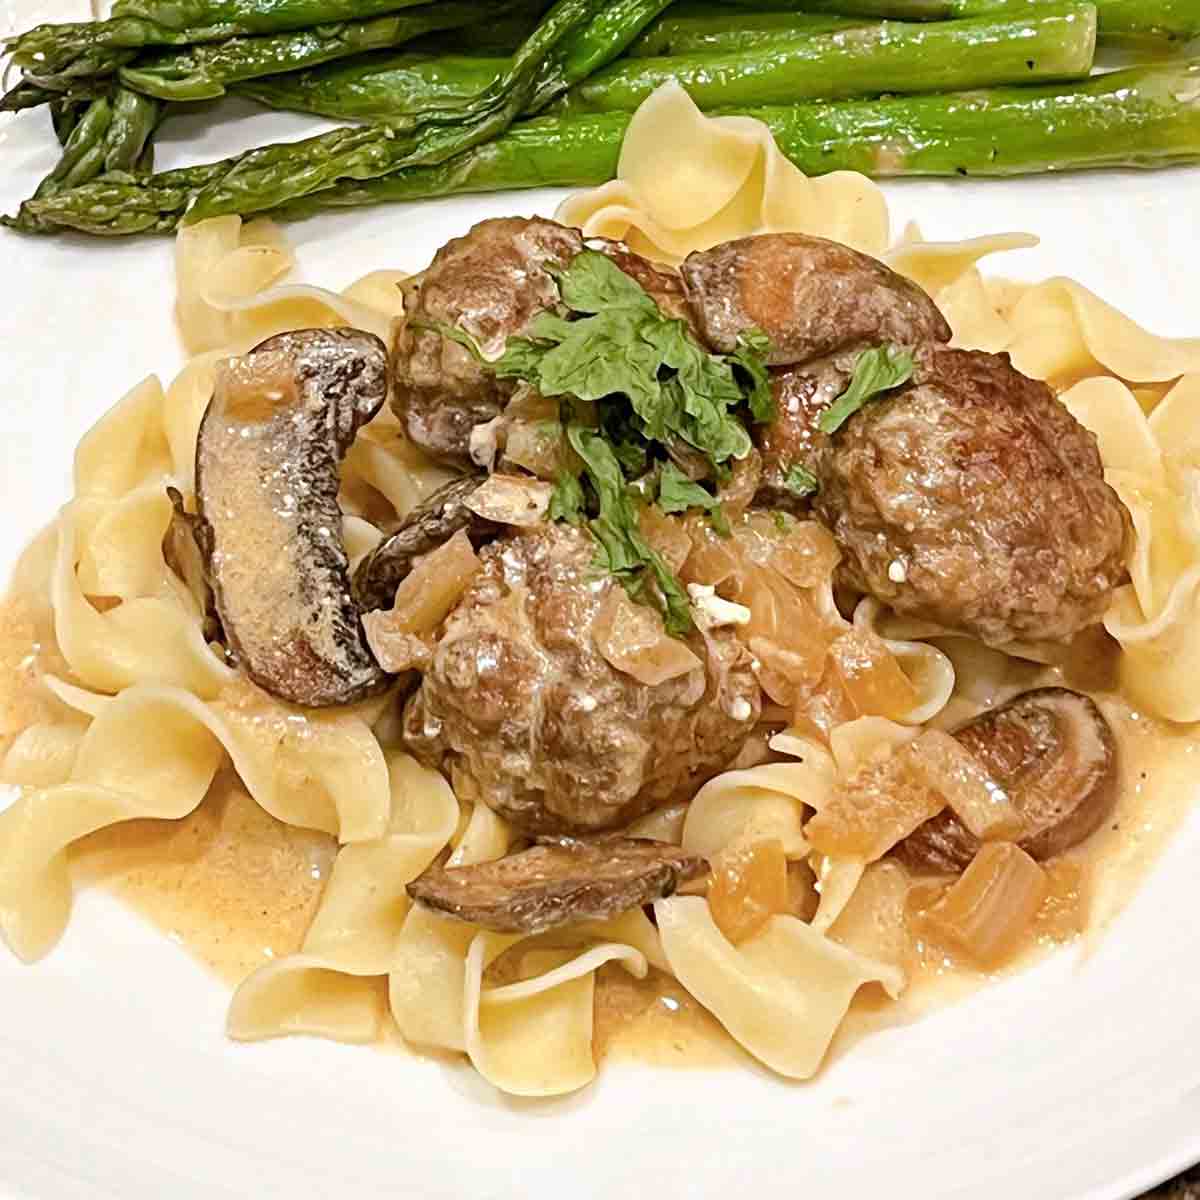 A plate of egg noodles topped with meatball stroganoff and asparagus on the side.